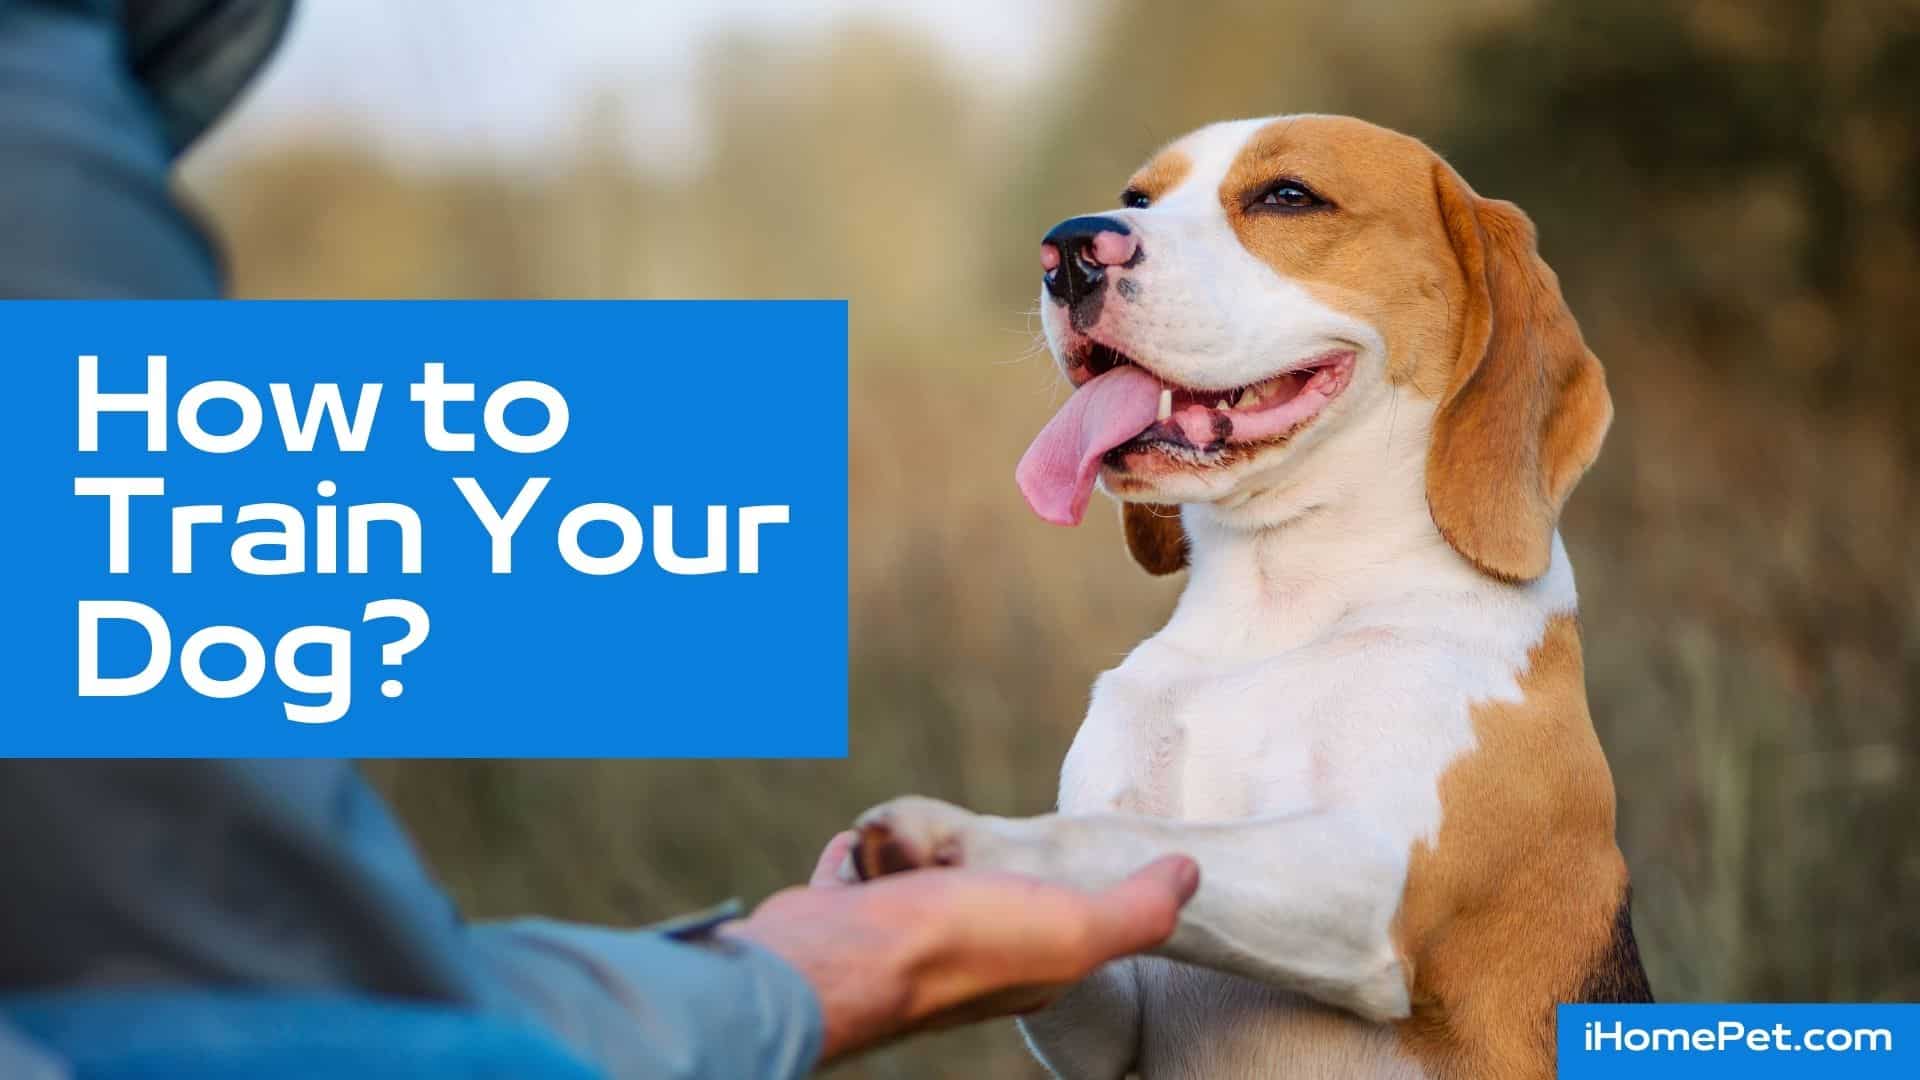 Training your dog to have good new behavior